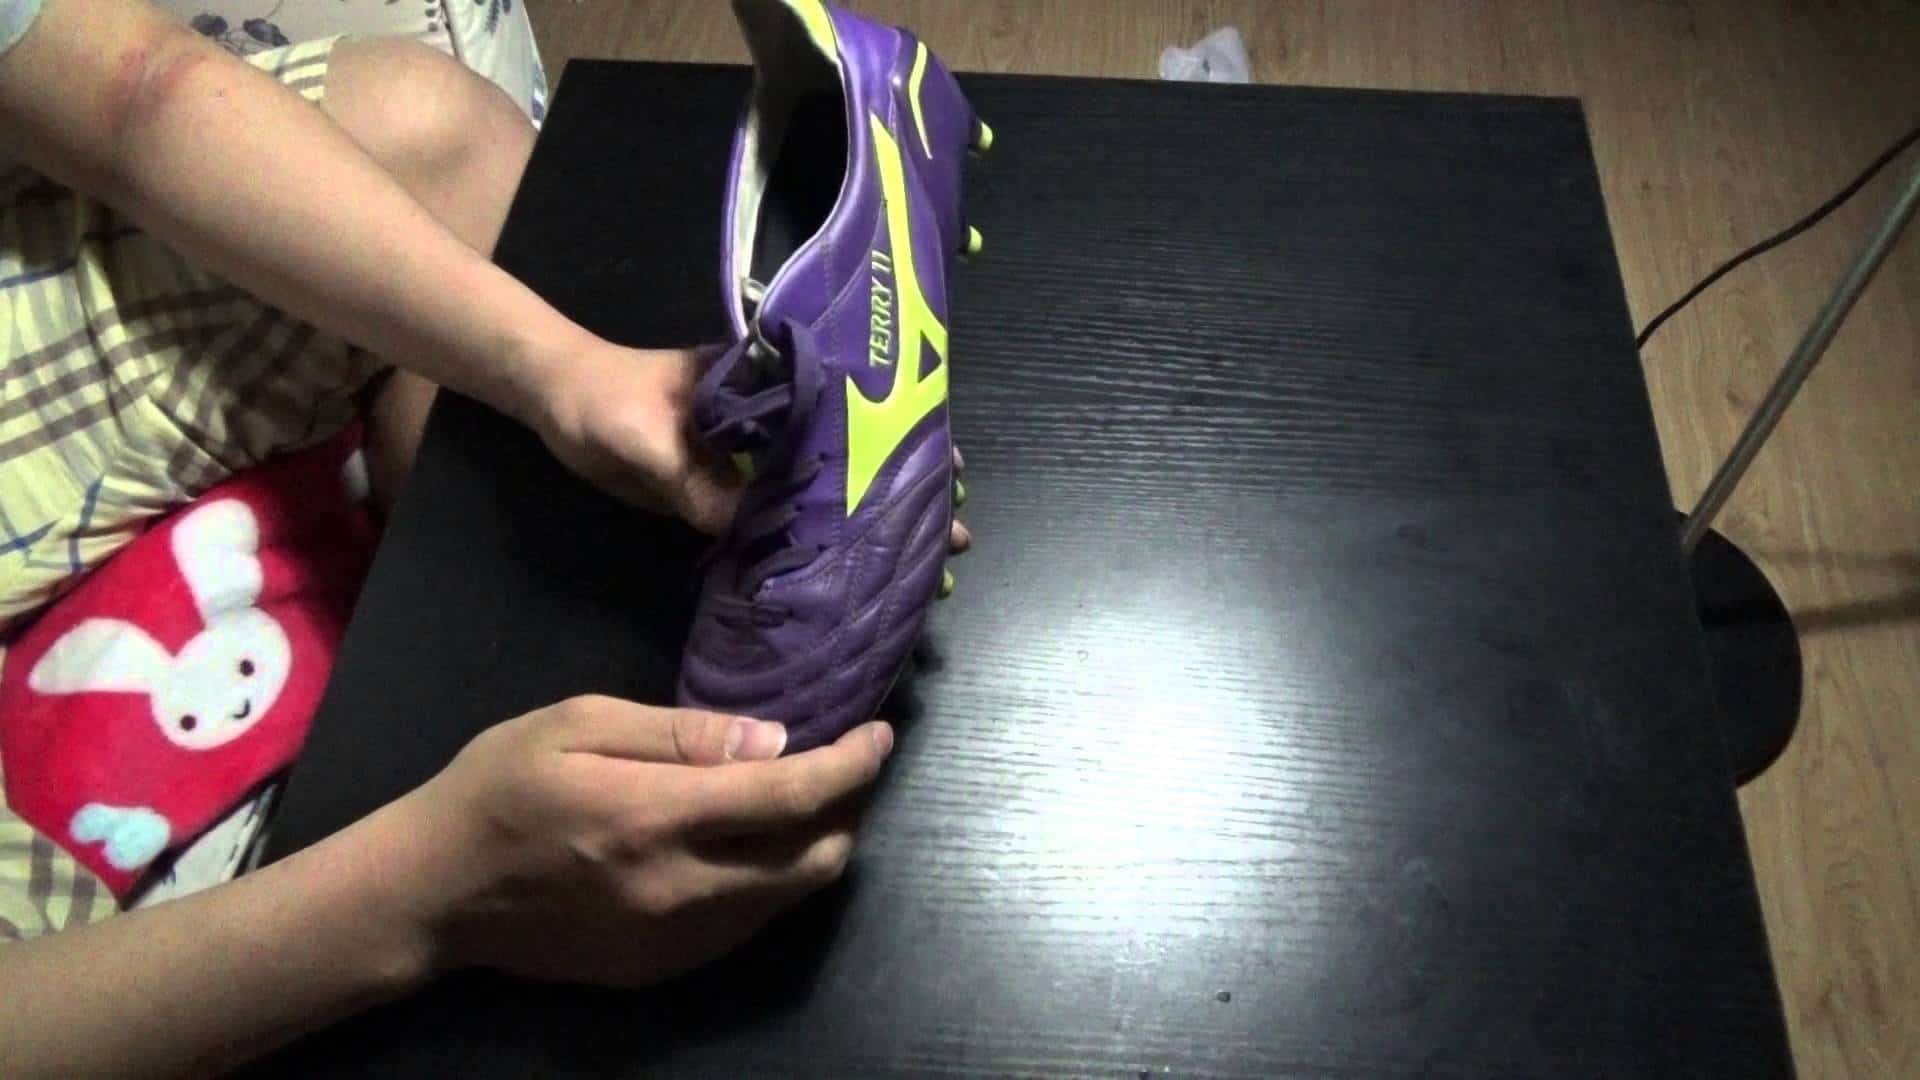 how to stretch tennis shoes